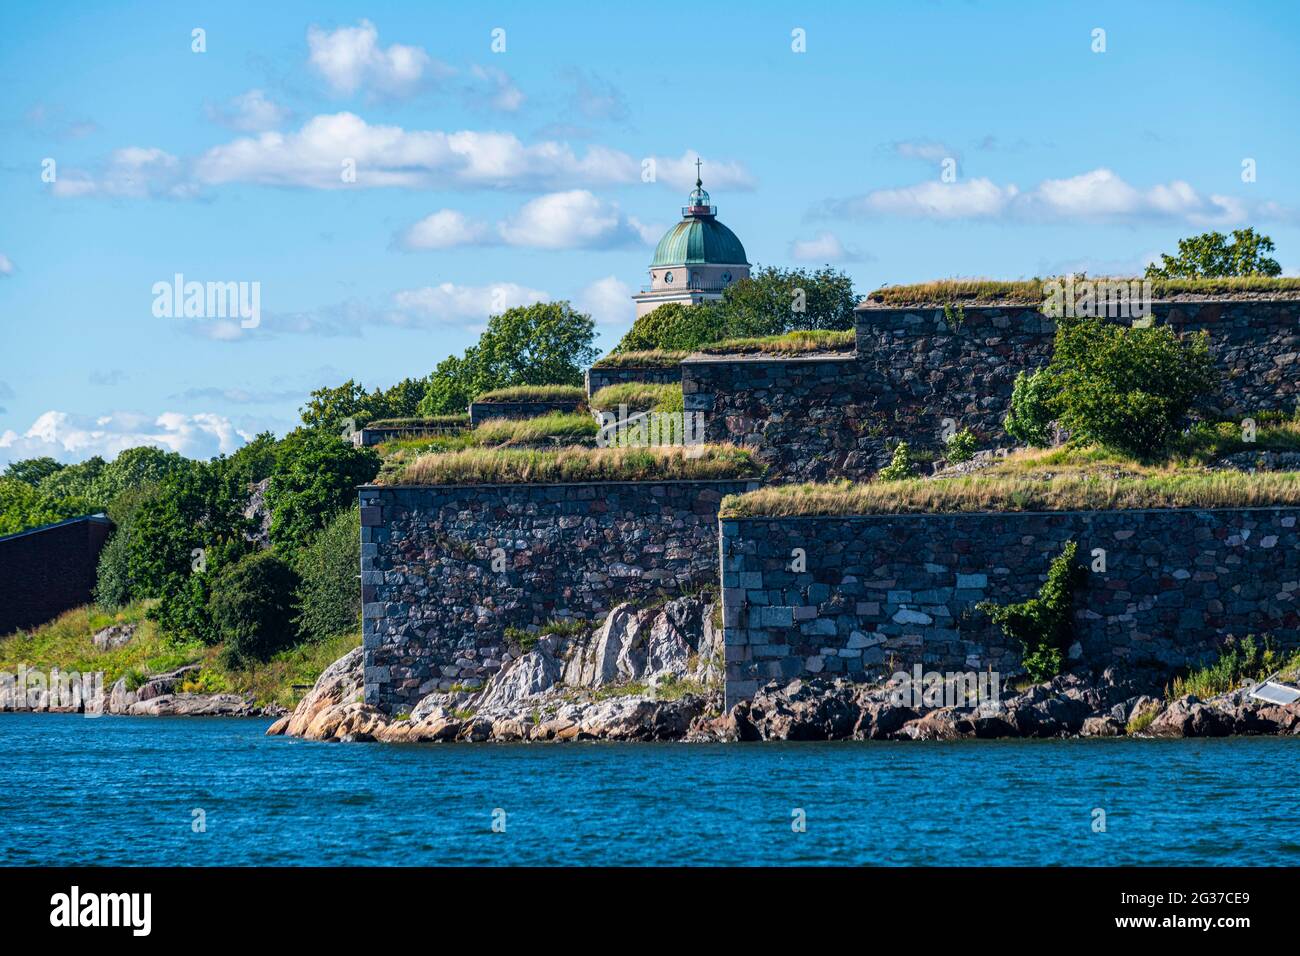 Fortified walls at the Unesco world heritage site Suomenlinna sea fortress, Helsinki, Finland Stock Photo